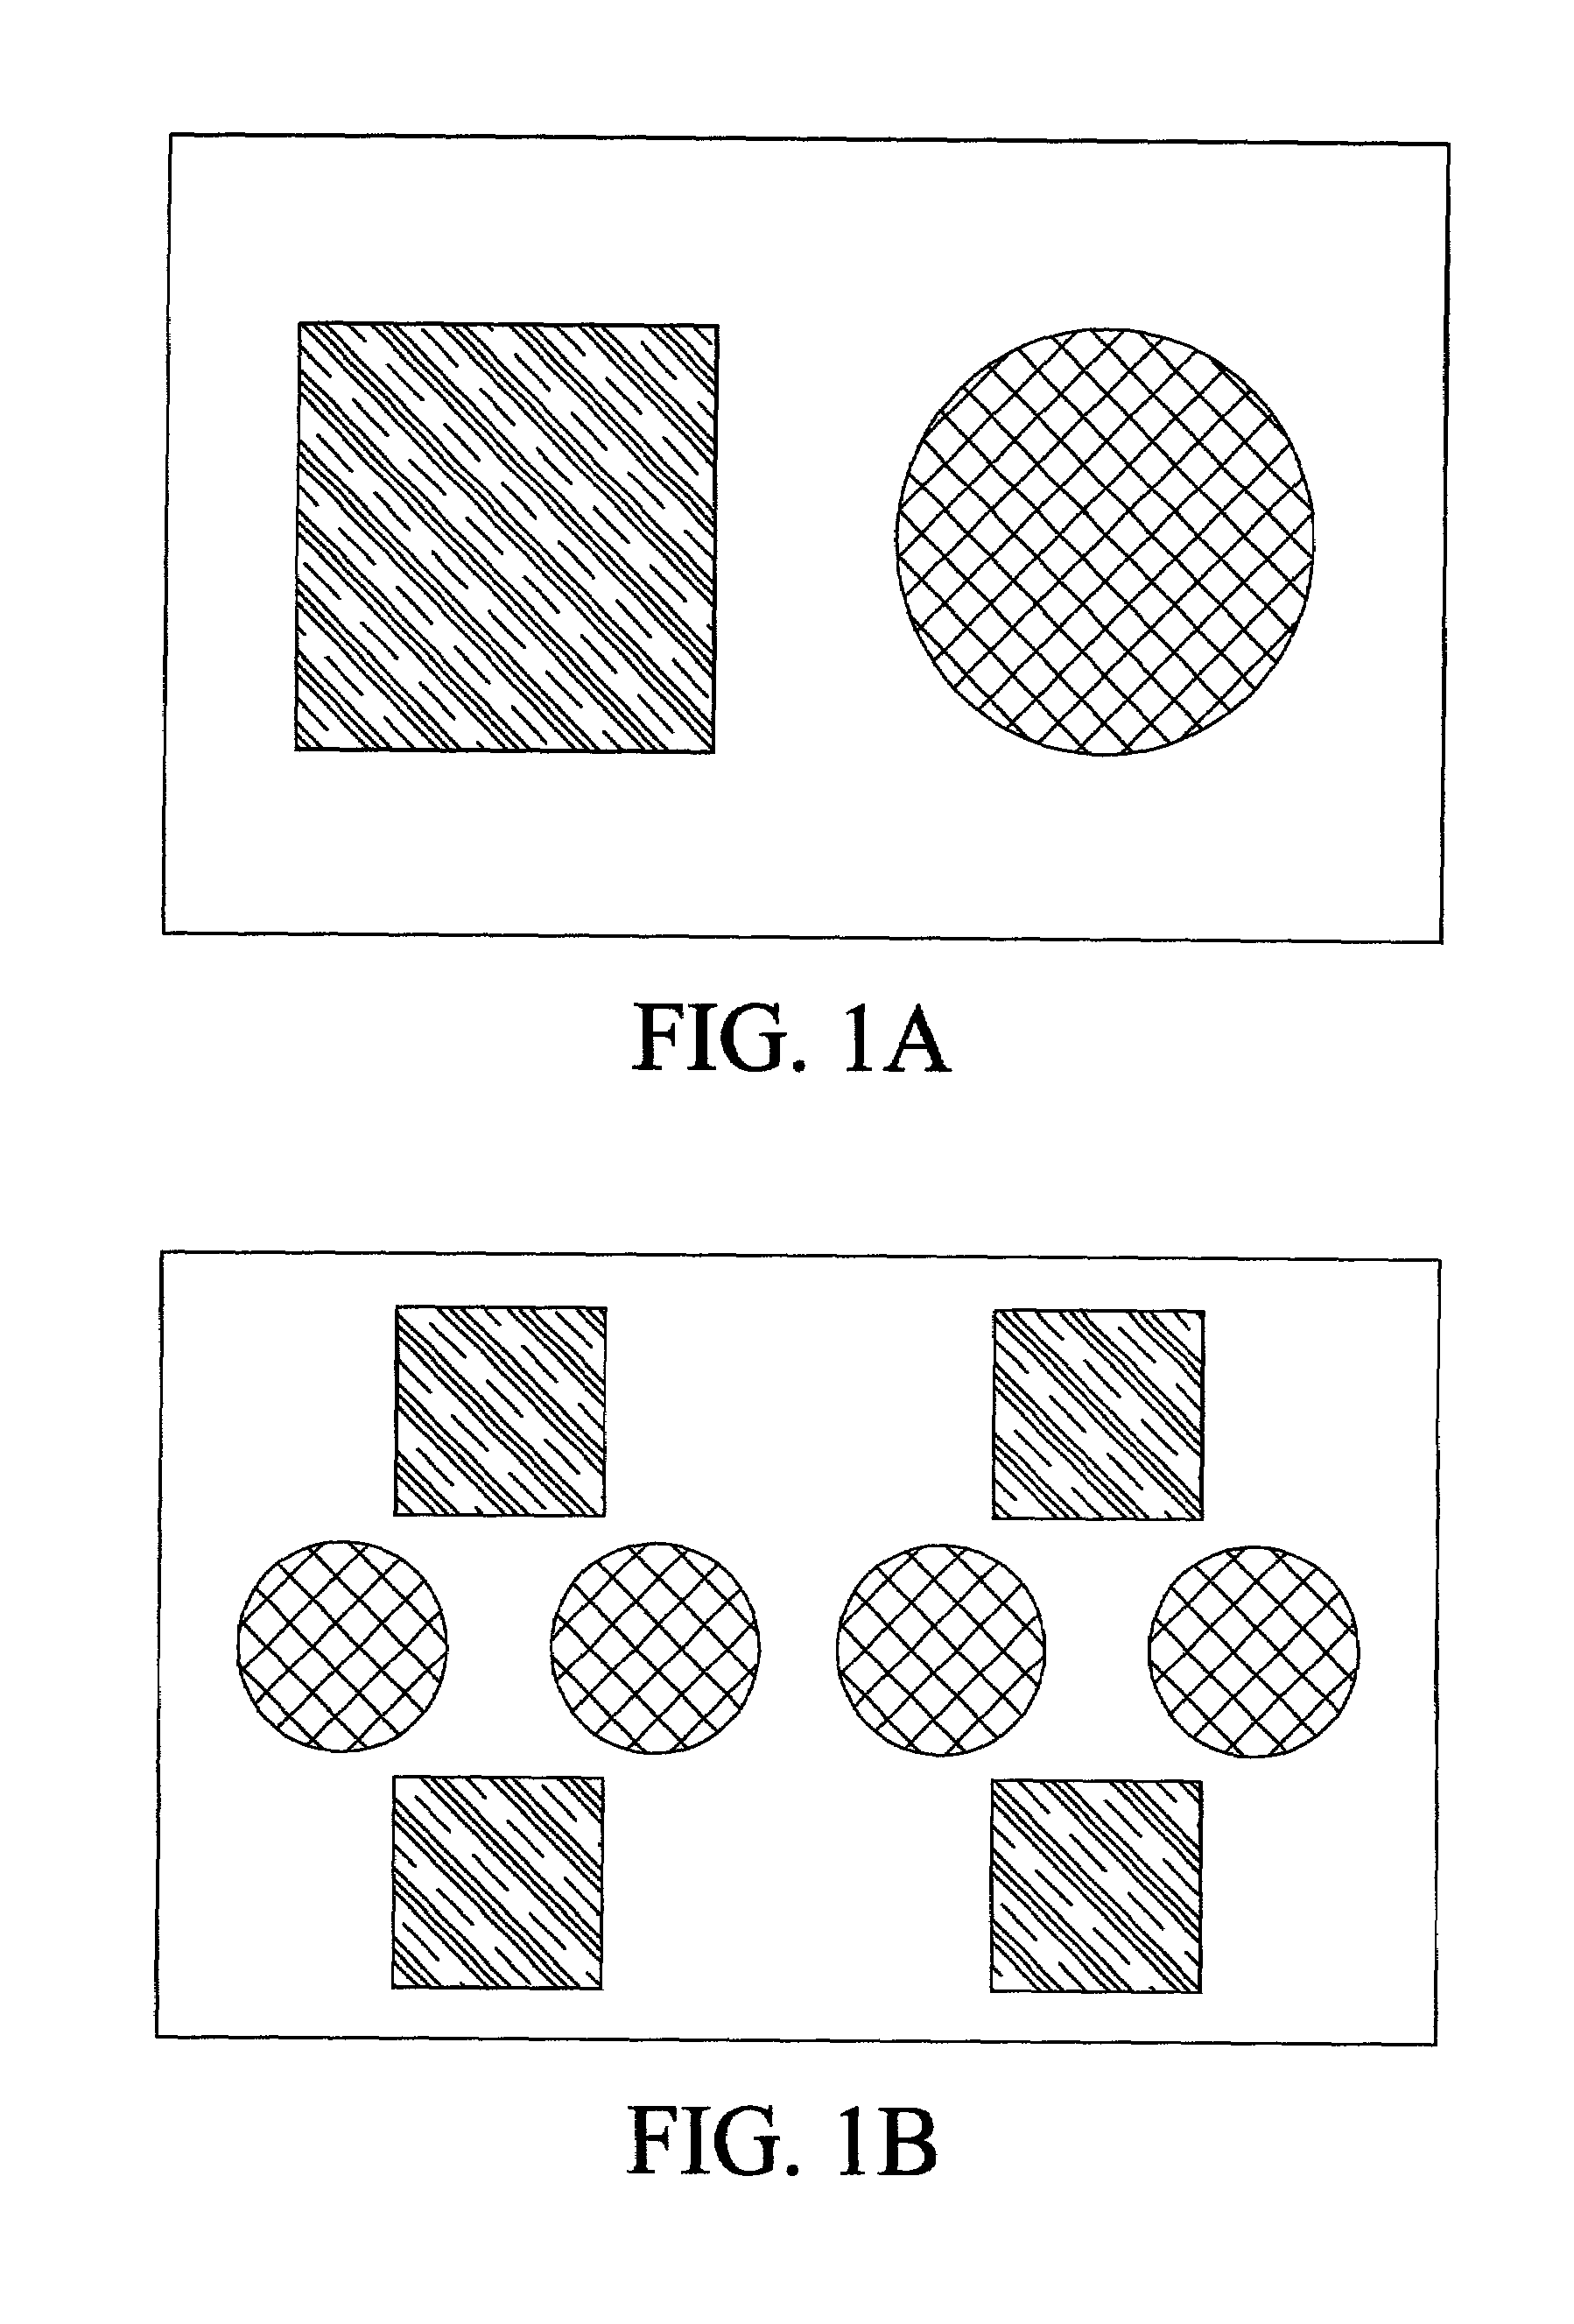 Method for image description using color and local spatial information